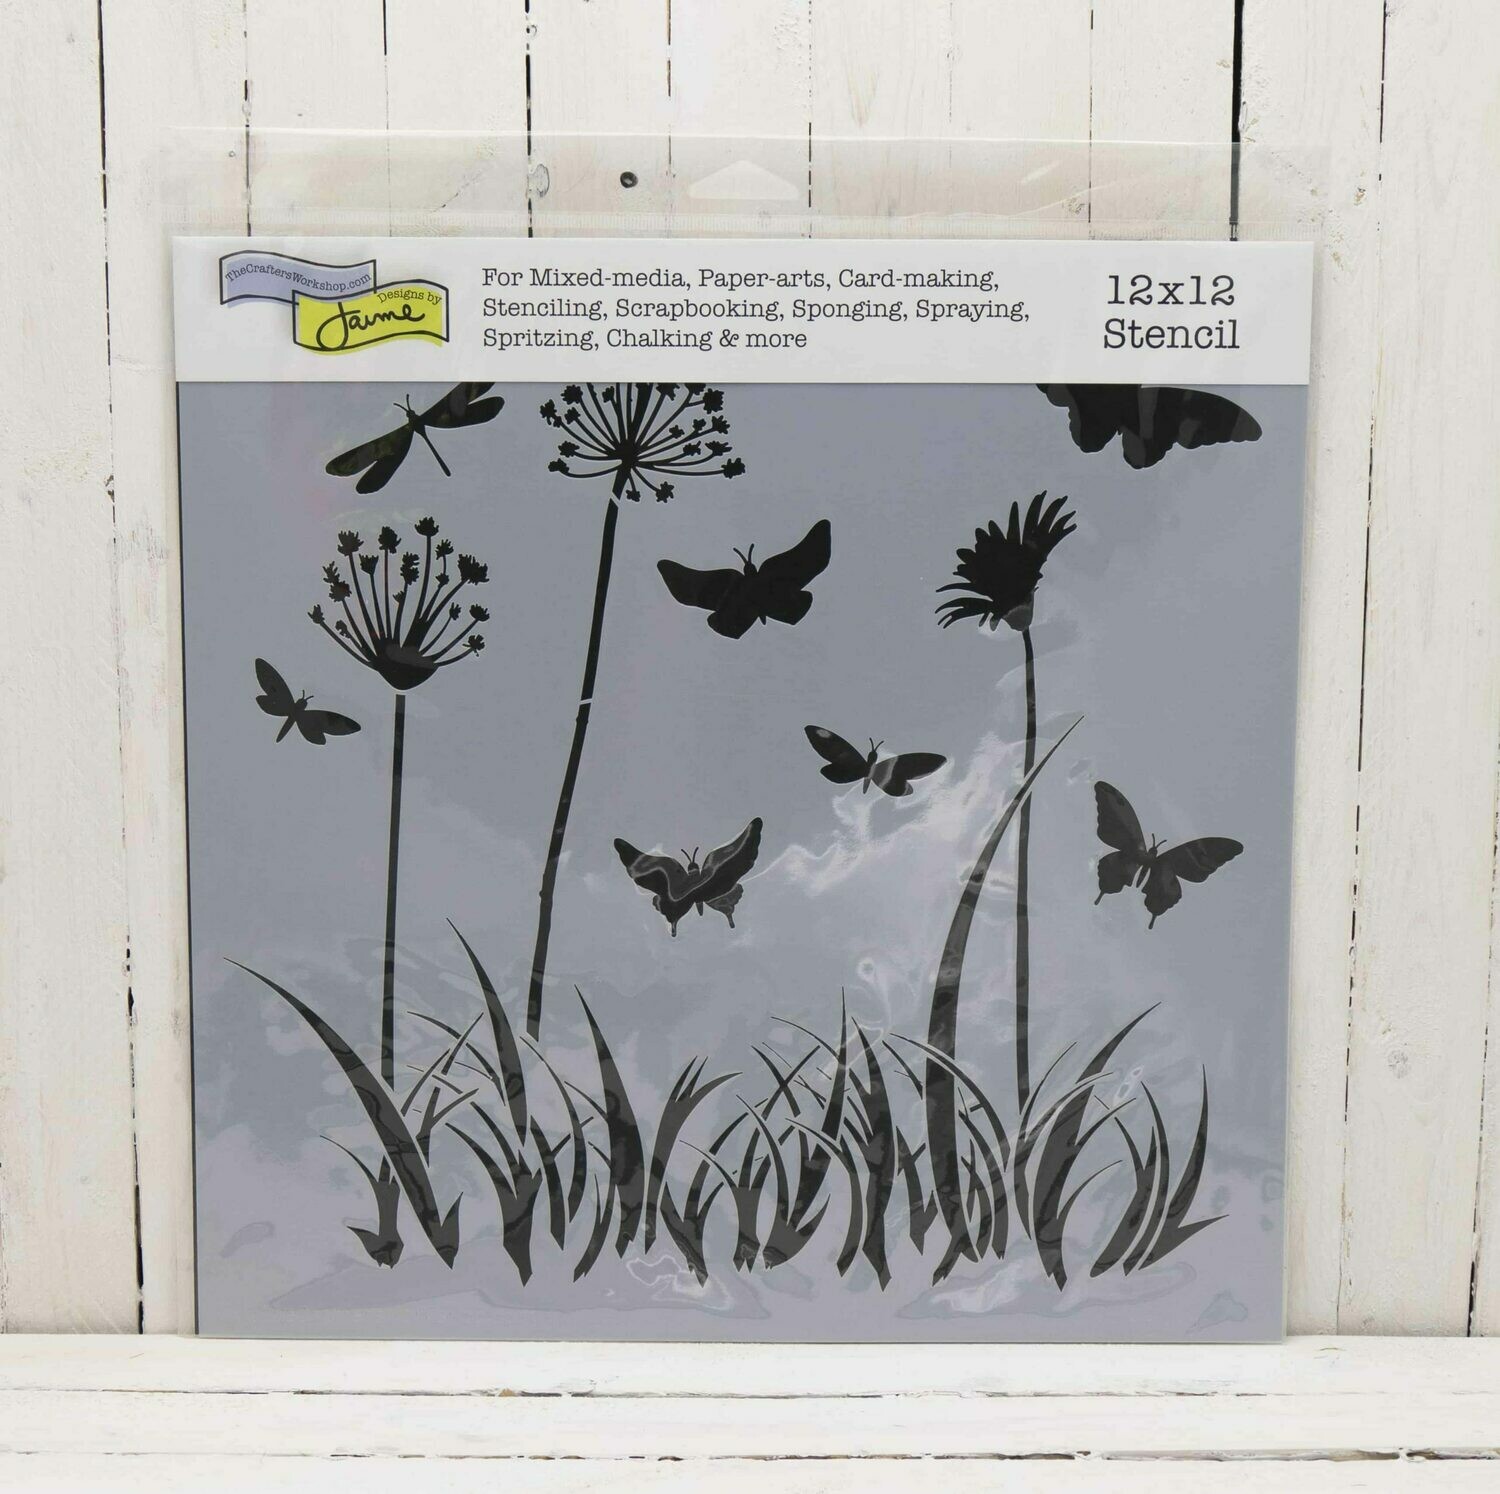 The Crafters Workshop Template -12 x 12 Inches - Butterfly Meadow